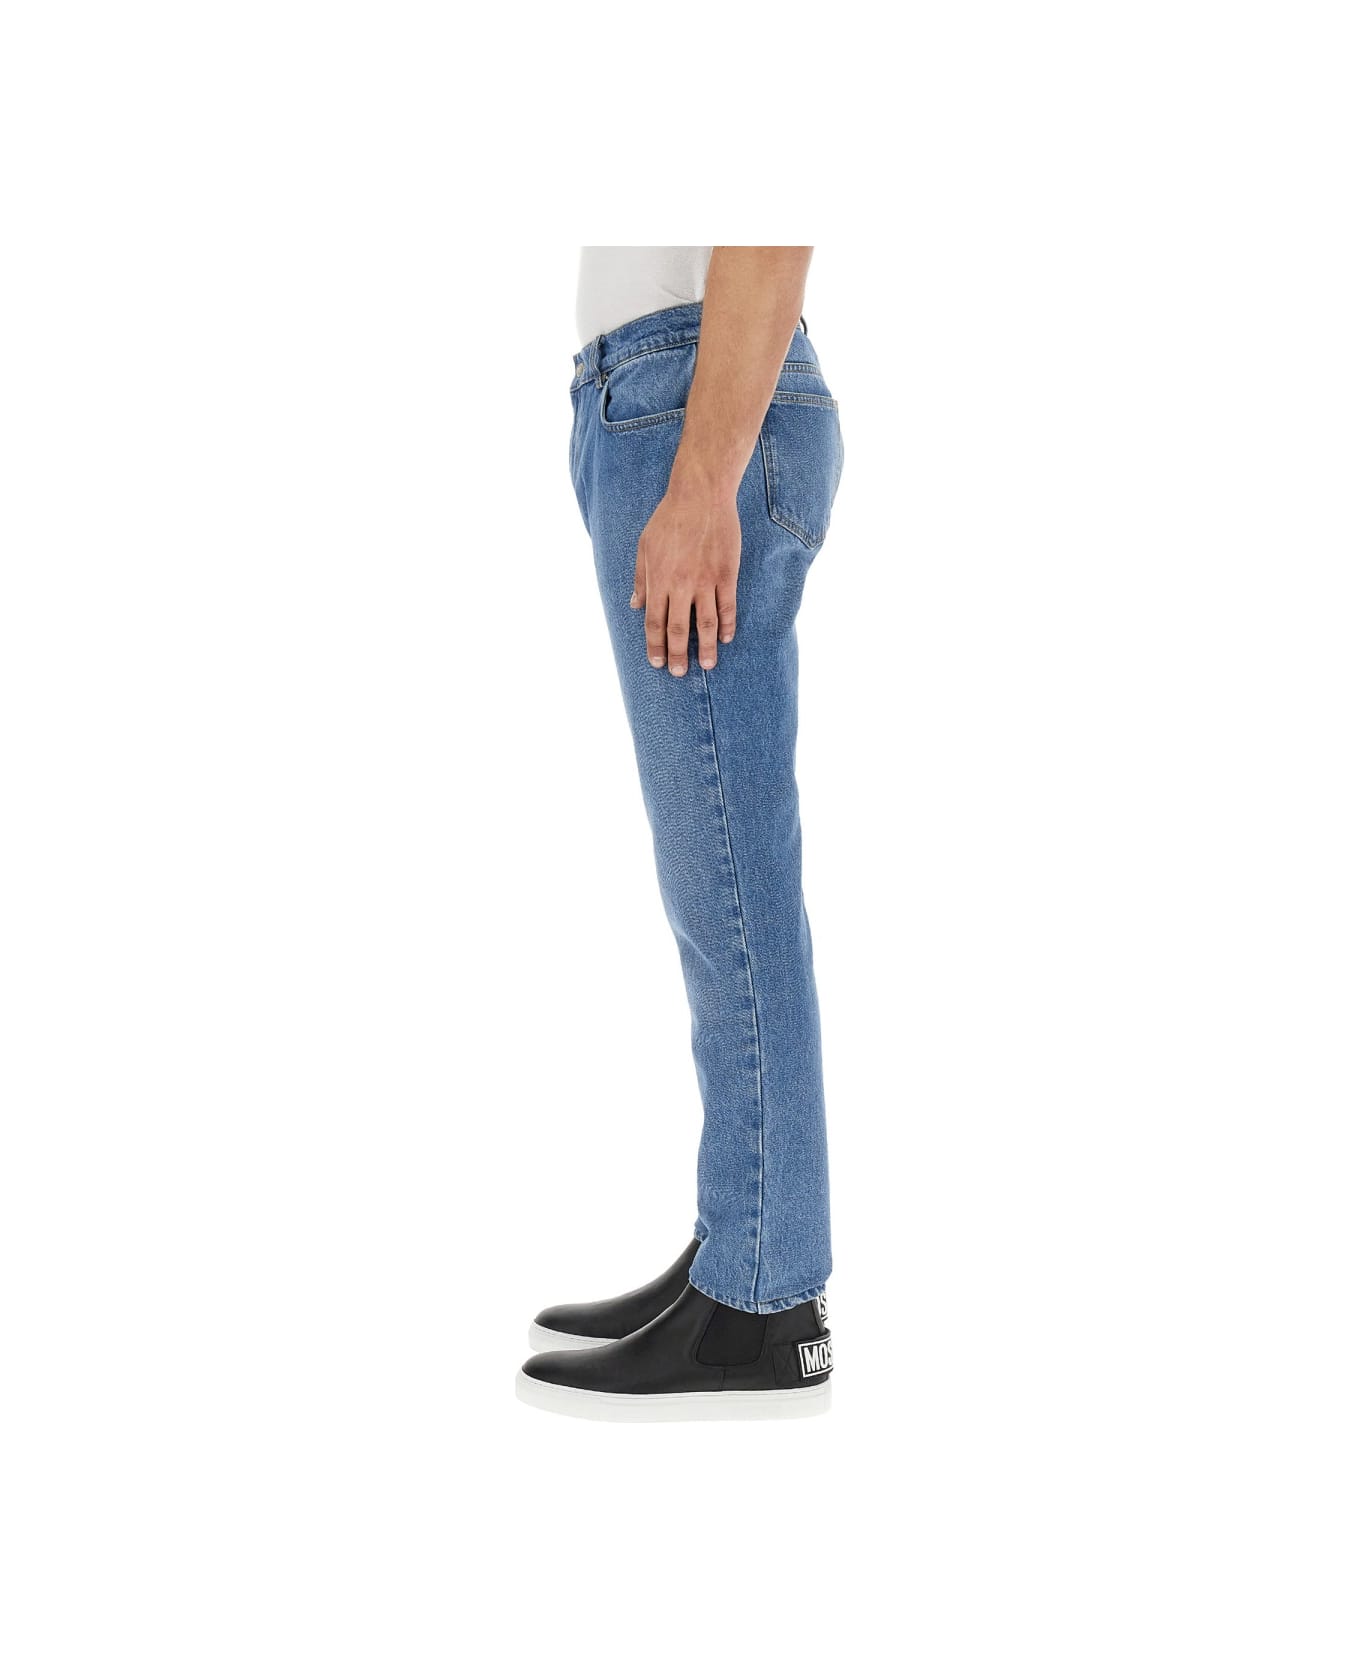 Moschino Teddy Patch Jeans - BLUE